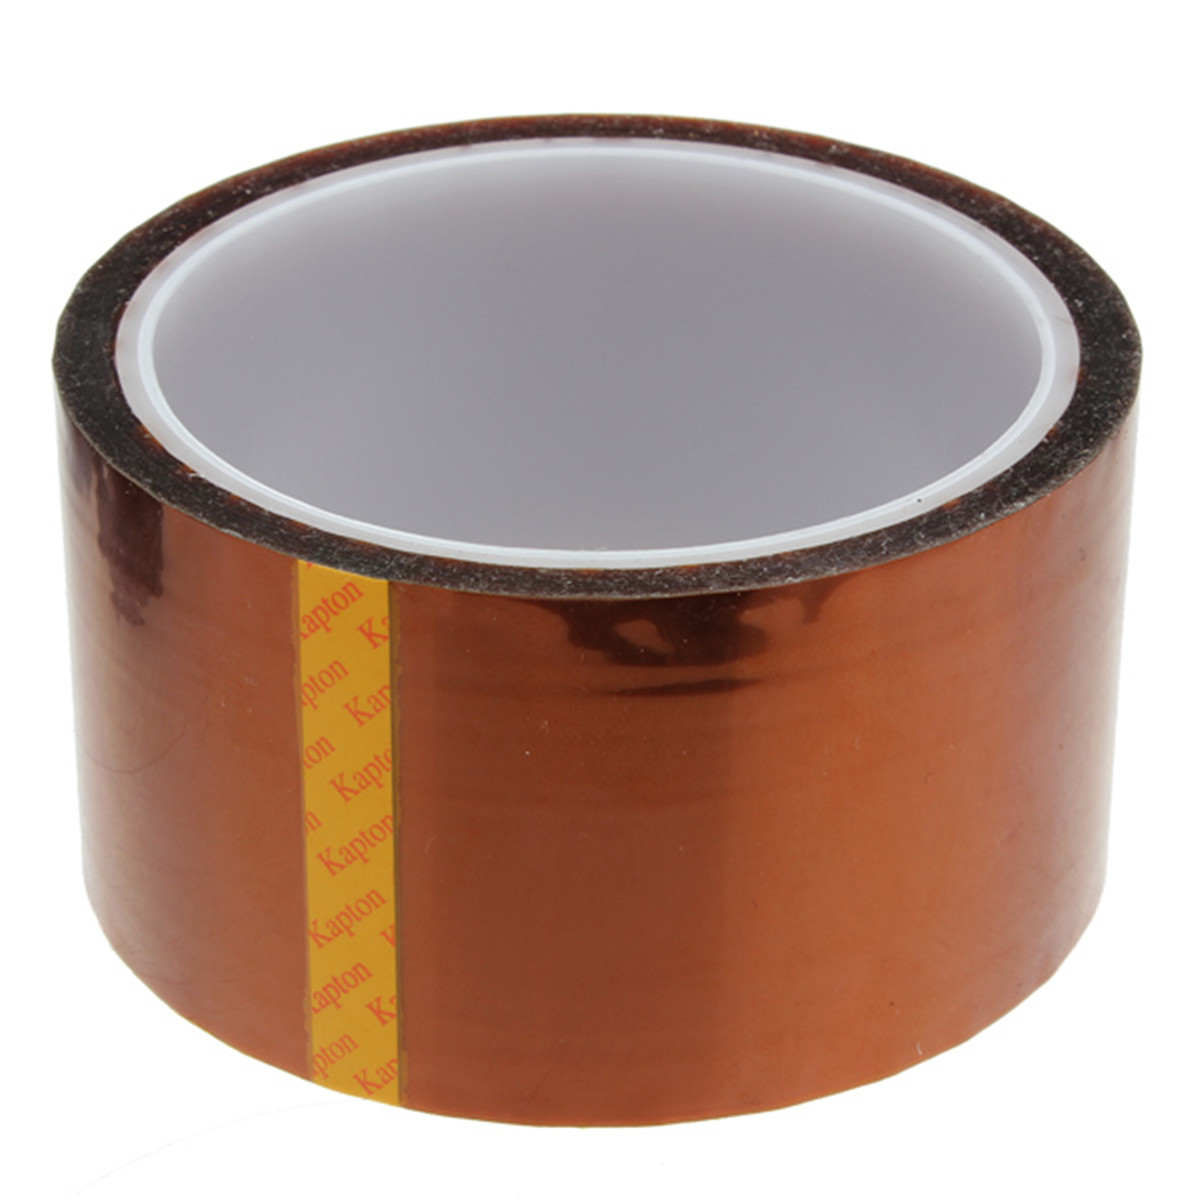 Excellway-High-Temperature-Heat-Resistant-Tape-Polyimide-50MM-x-30M-49152-6